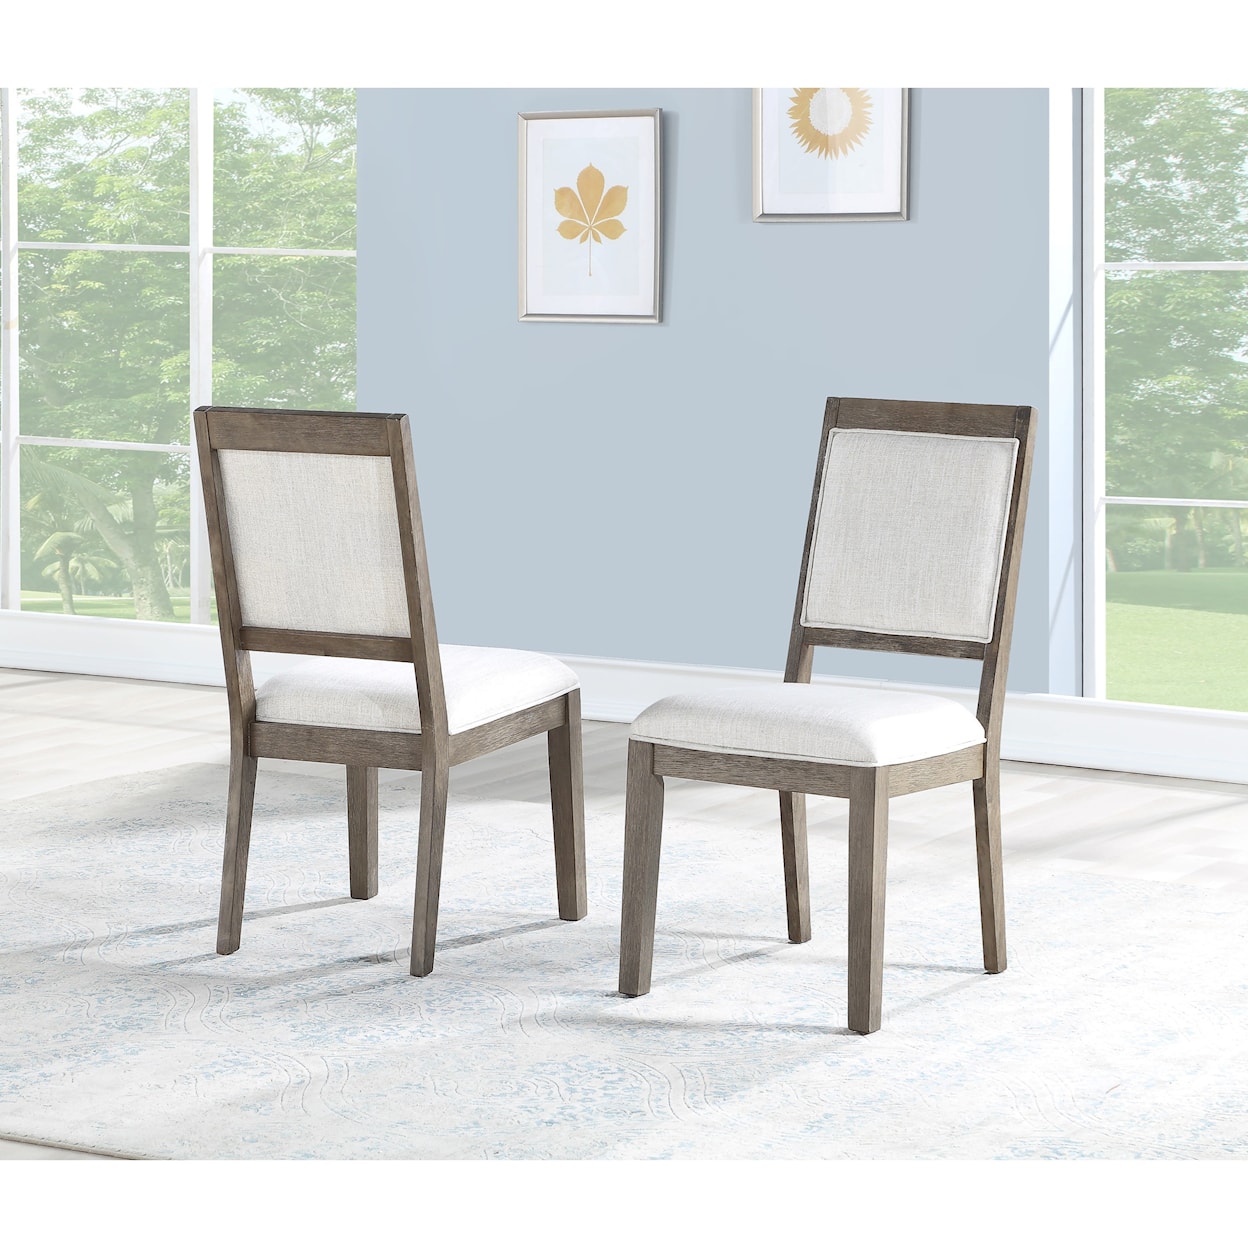 Prime Molly 5 Piece Table and Chair Set